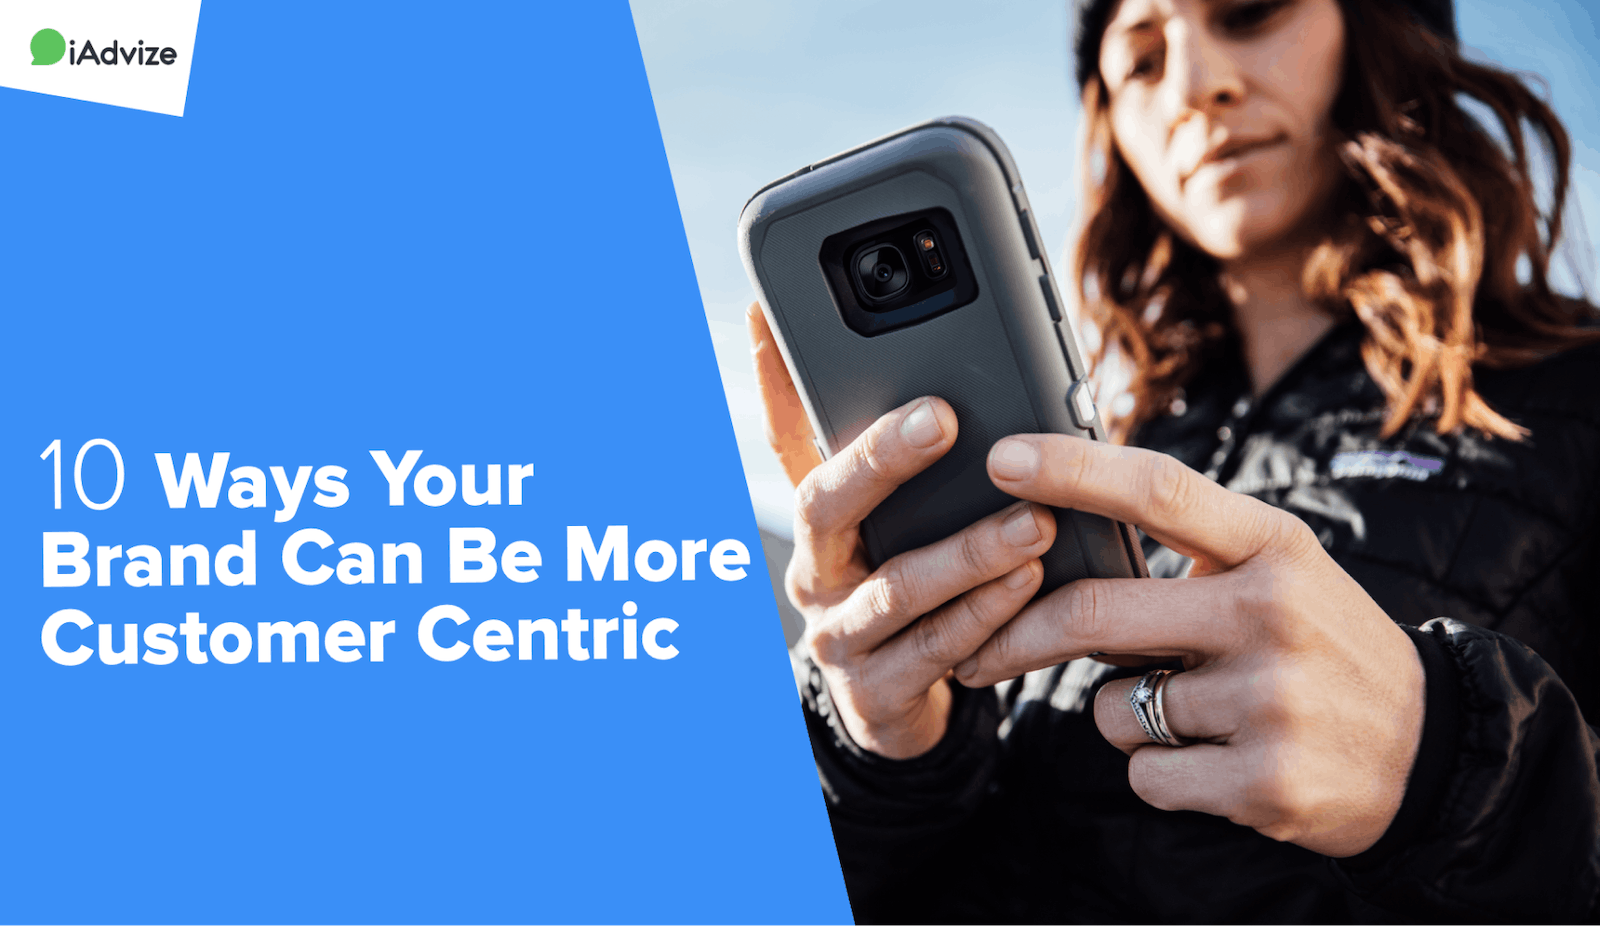 Read full post: 10 Ways Your Brand Can Be More Customer Centric